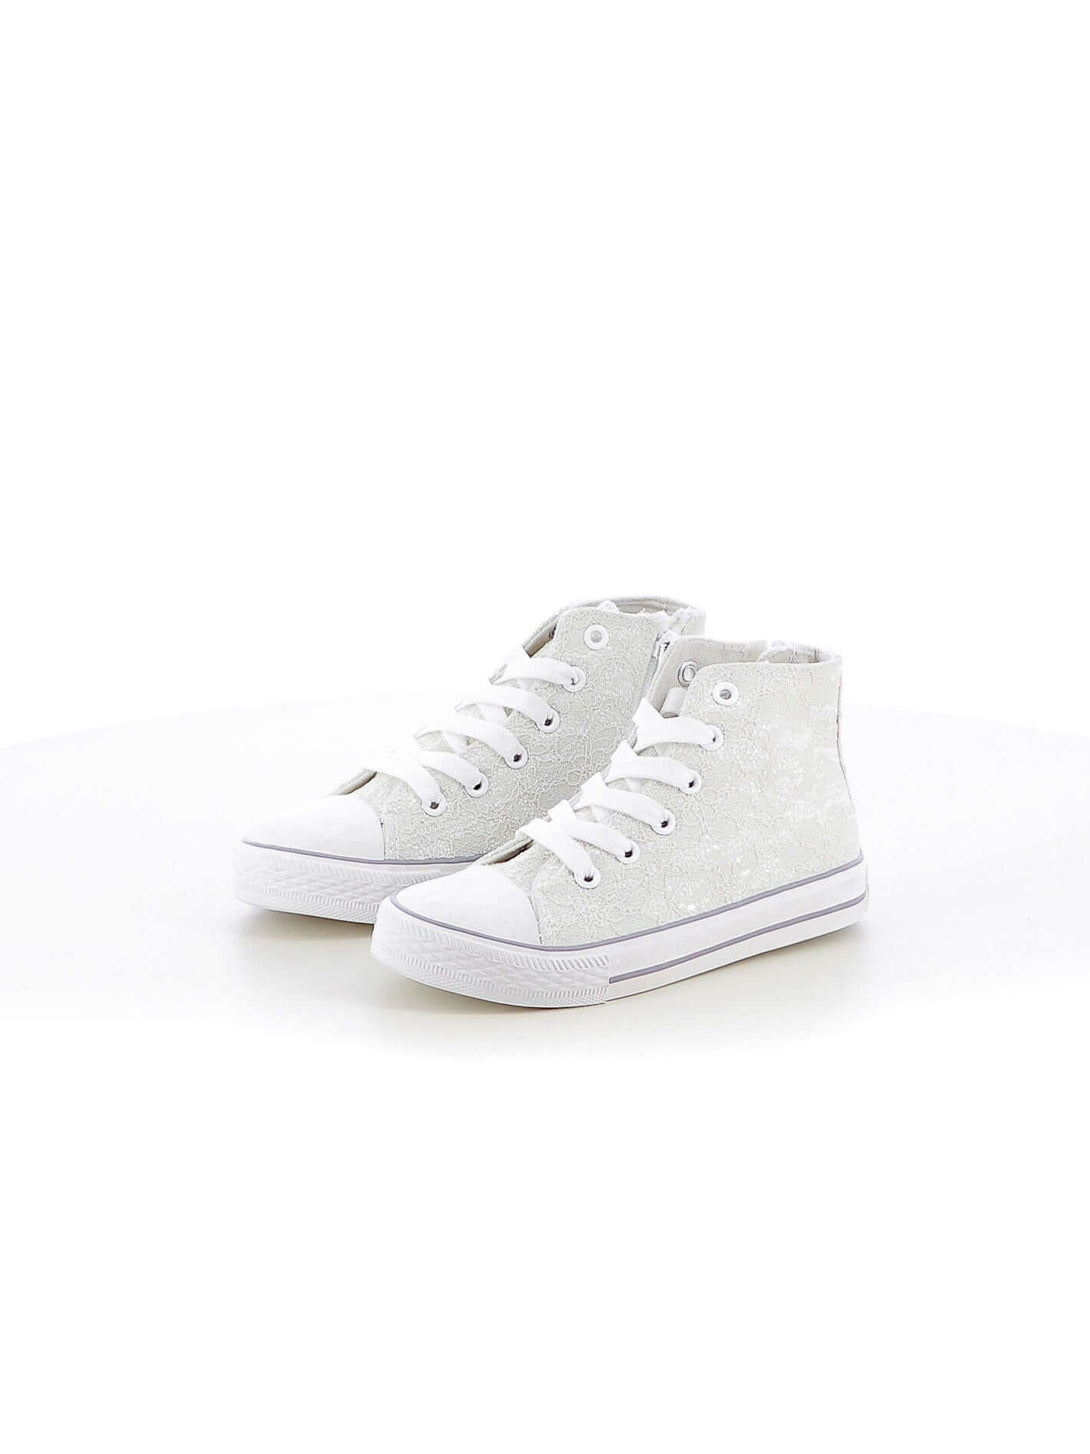 Sneakers in tela bambina LOVE DETAILS 135-729 bianco | Costa Superstore